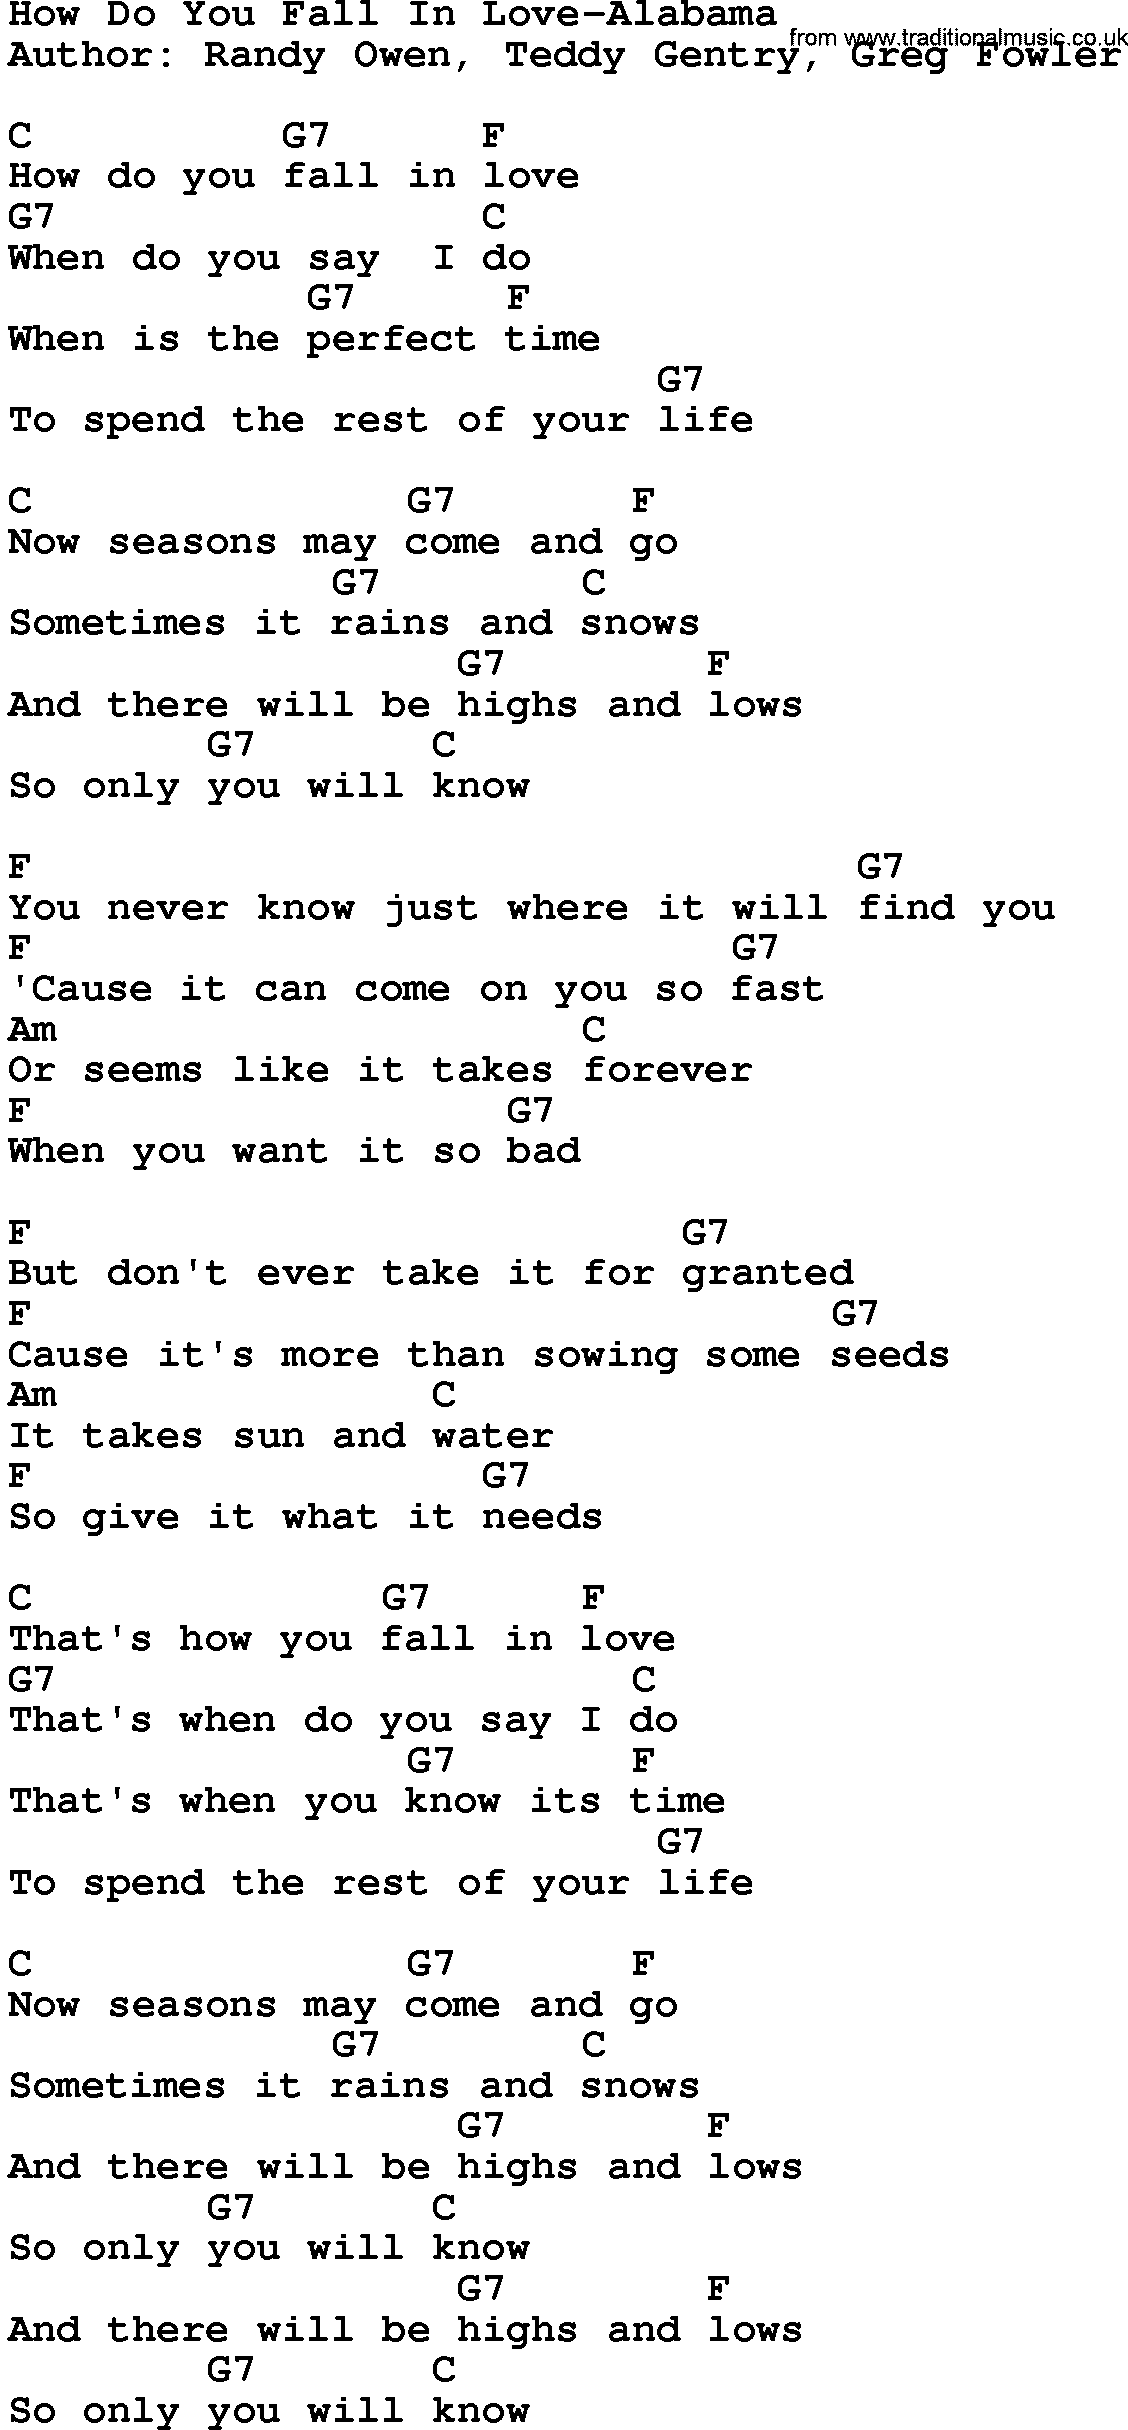 Country music song: How Do You Fall In Love-Alabama lyrics and chords